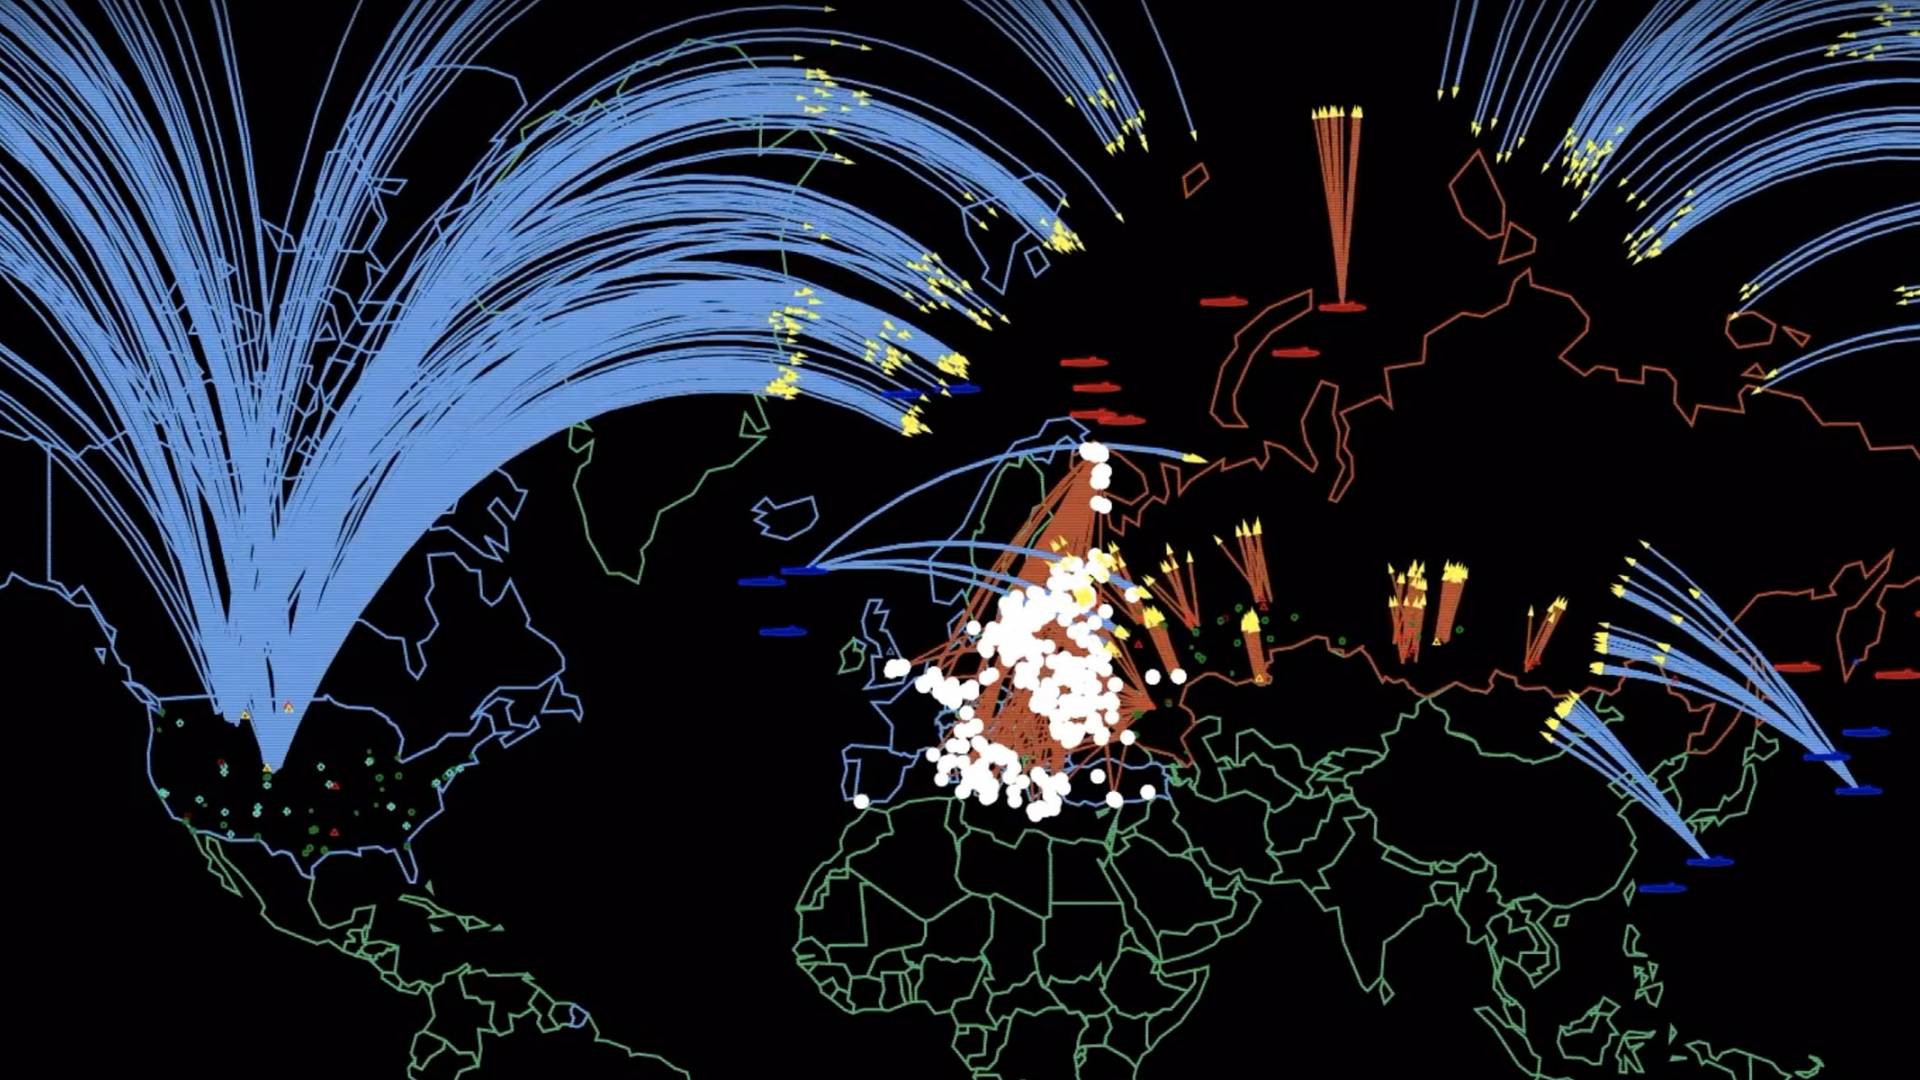 Video still of map with lines depicting nuclear war